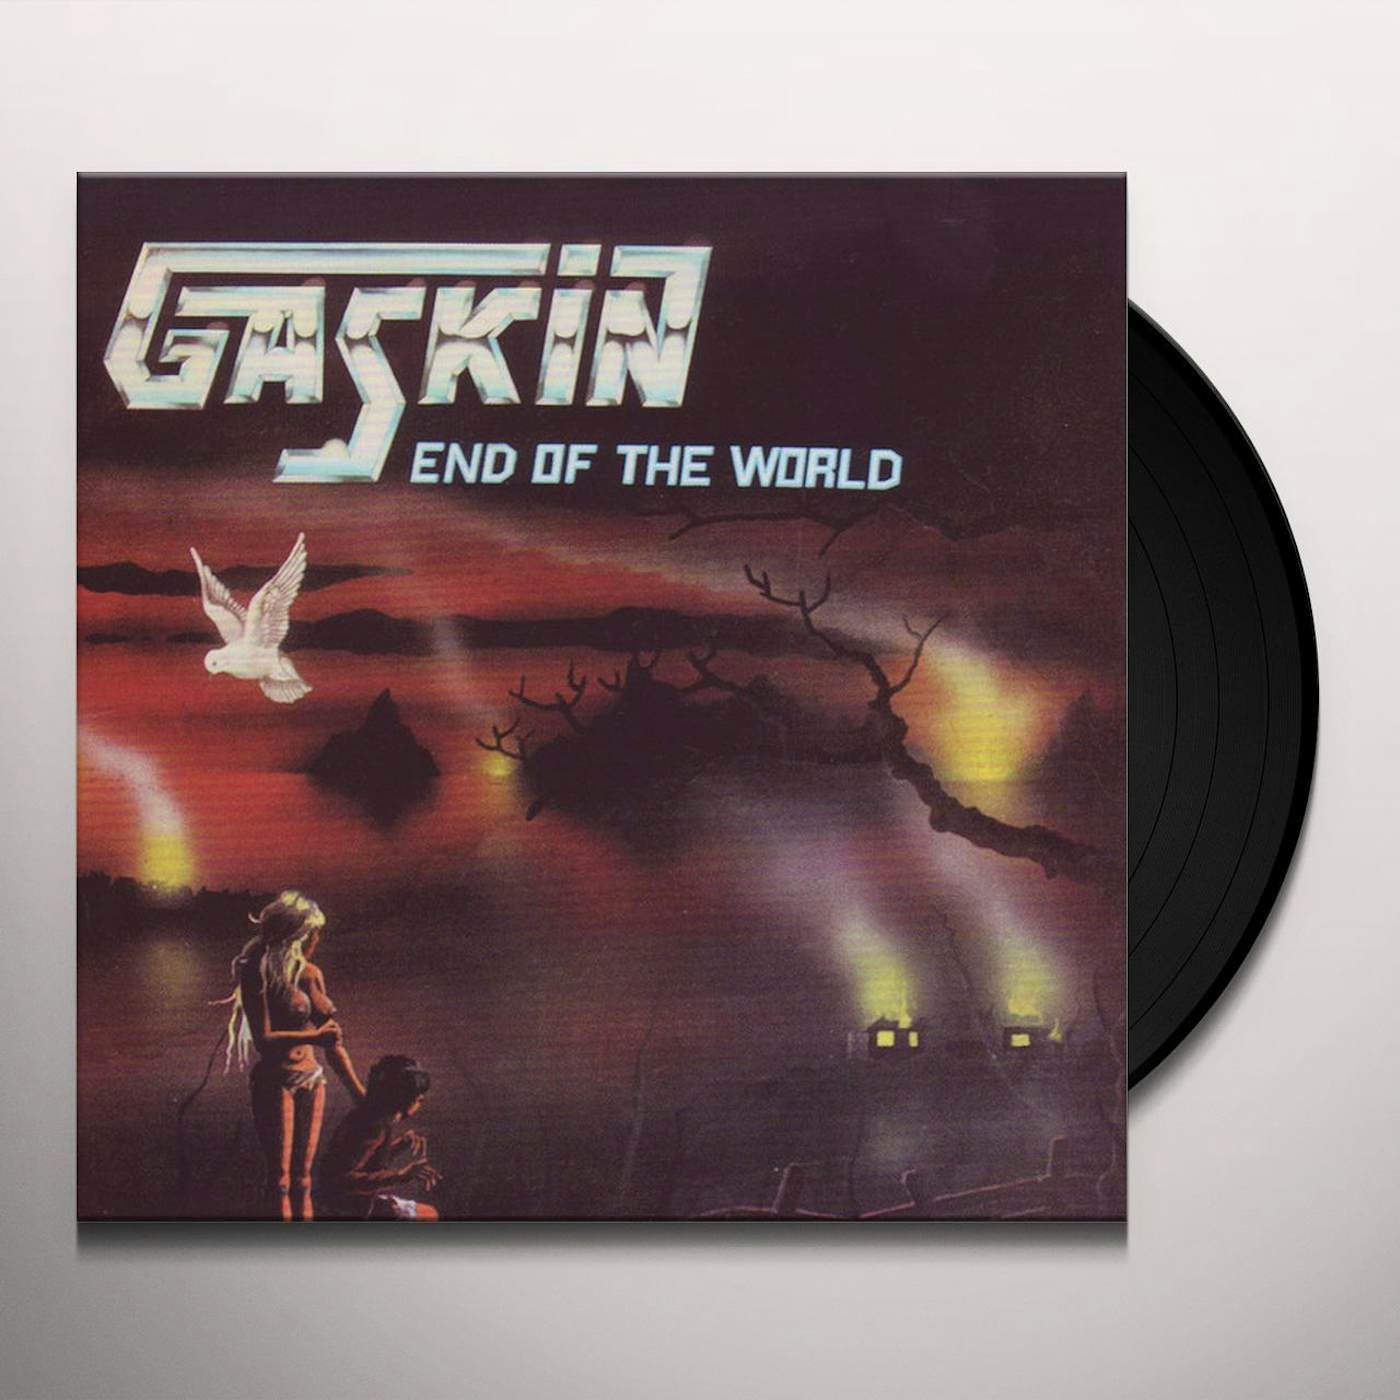 Gaskin End of the World Vinyl Record